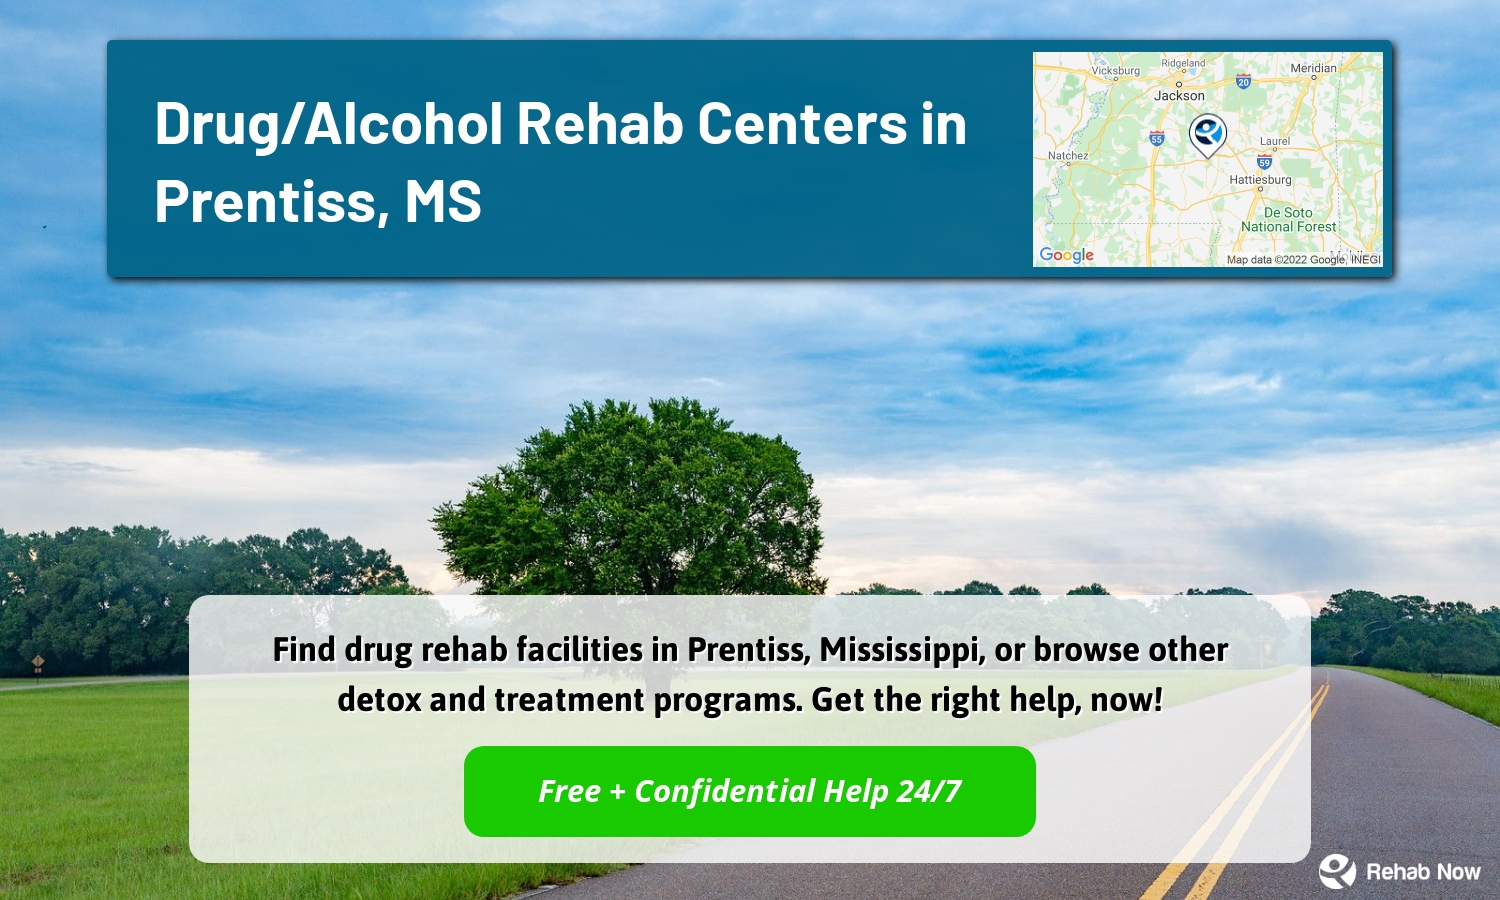 Find drug rehab facilities in Prentiss, Mississippi, or browse other detox and treatment programs. Get the right help, now!